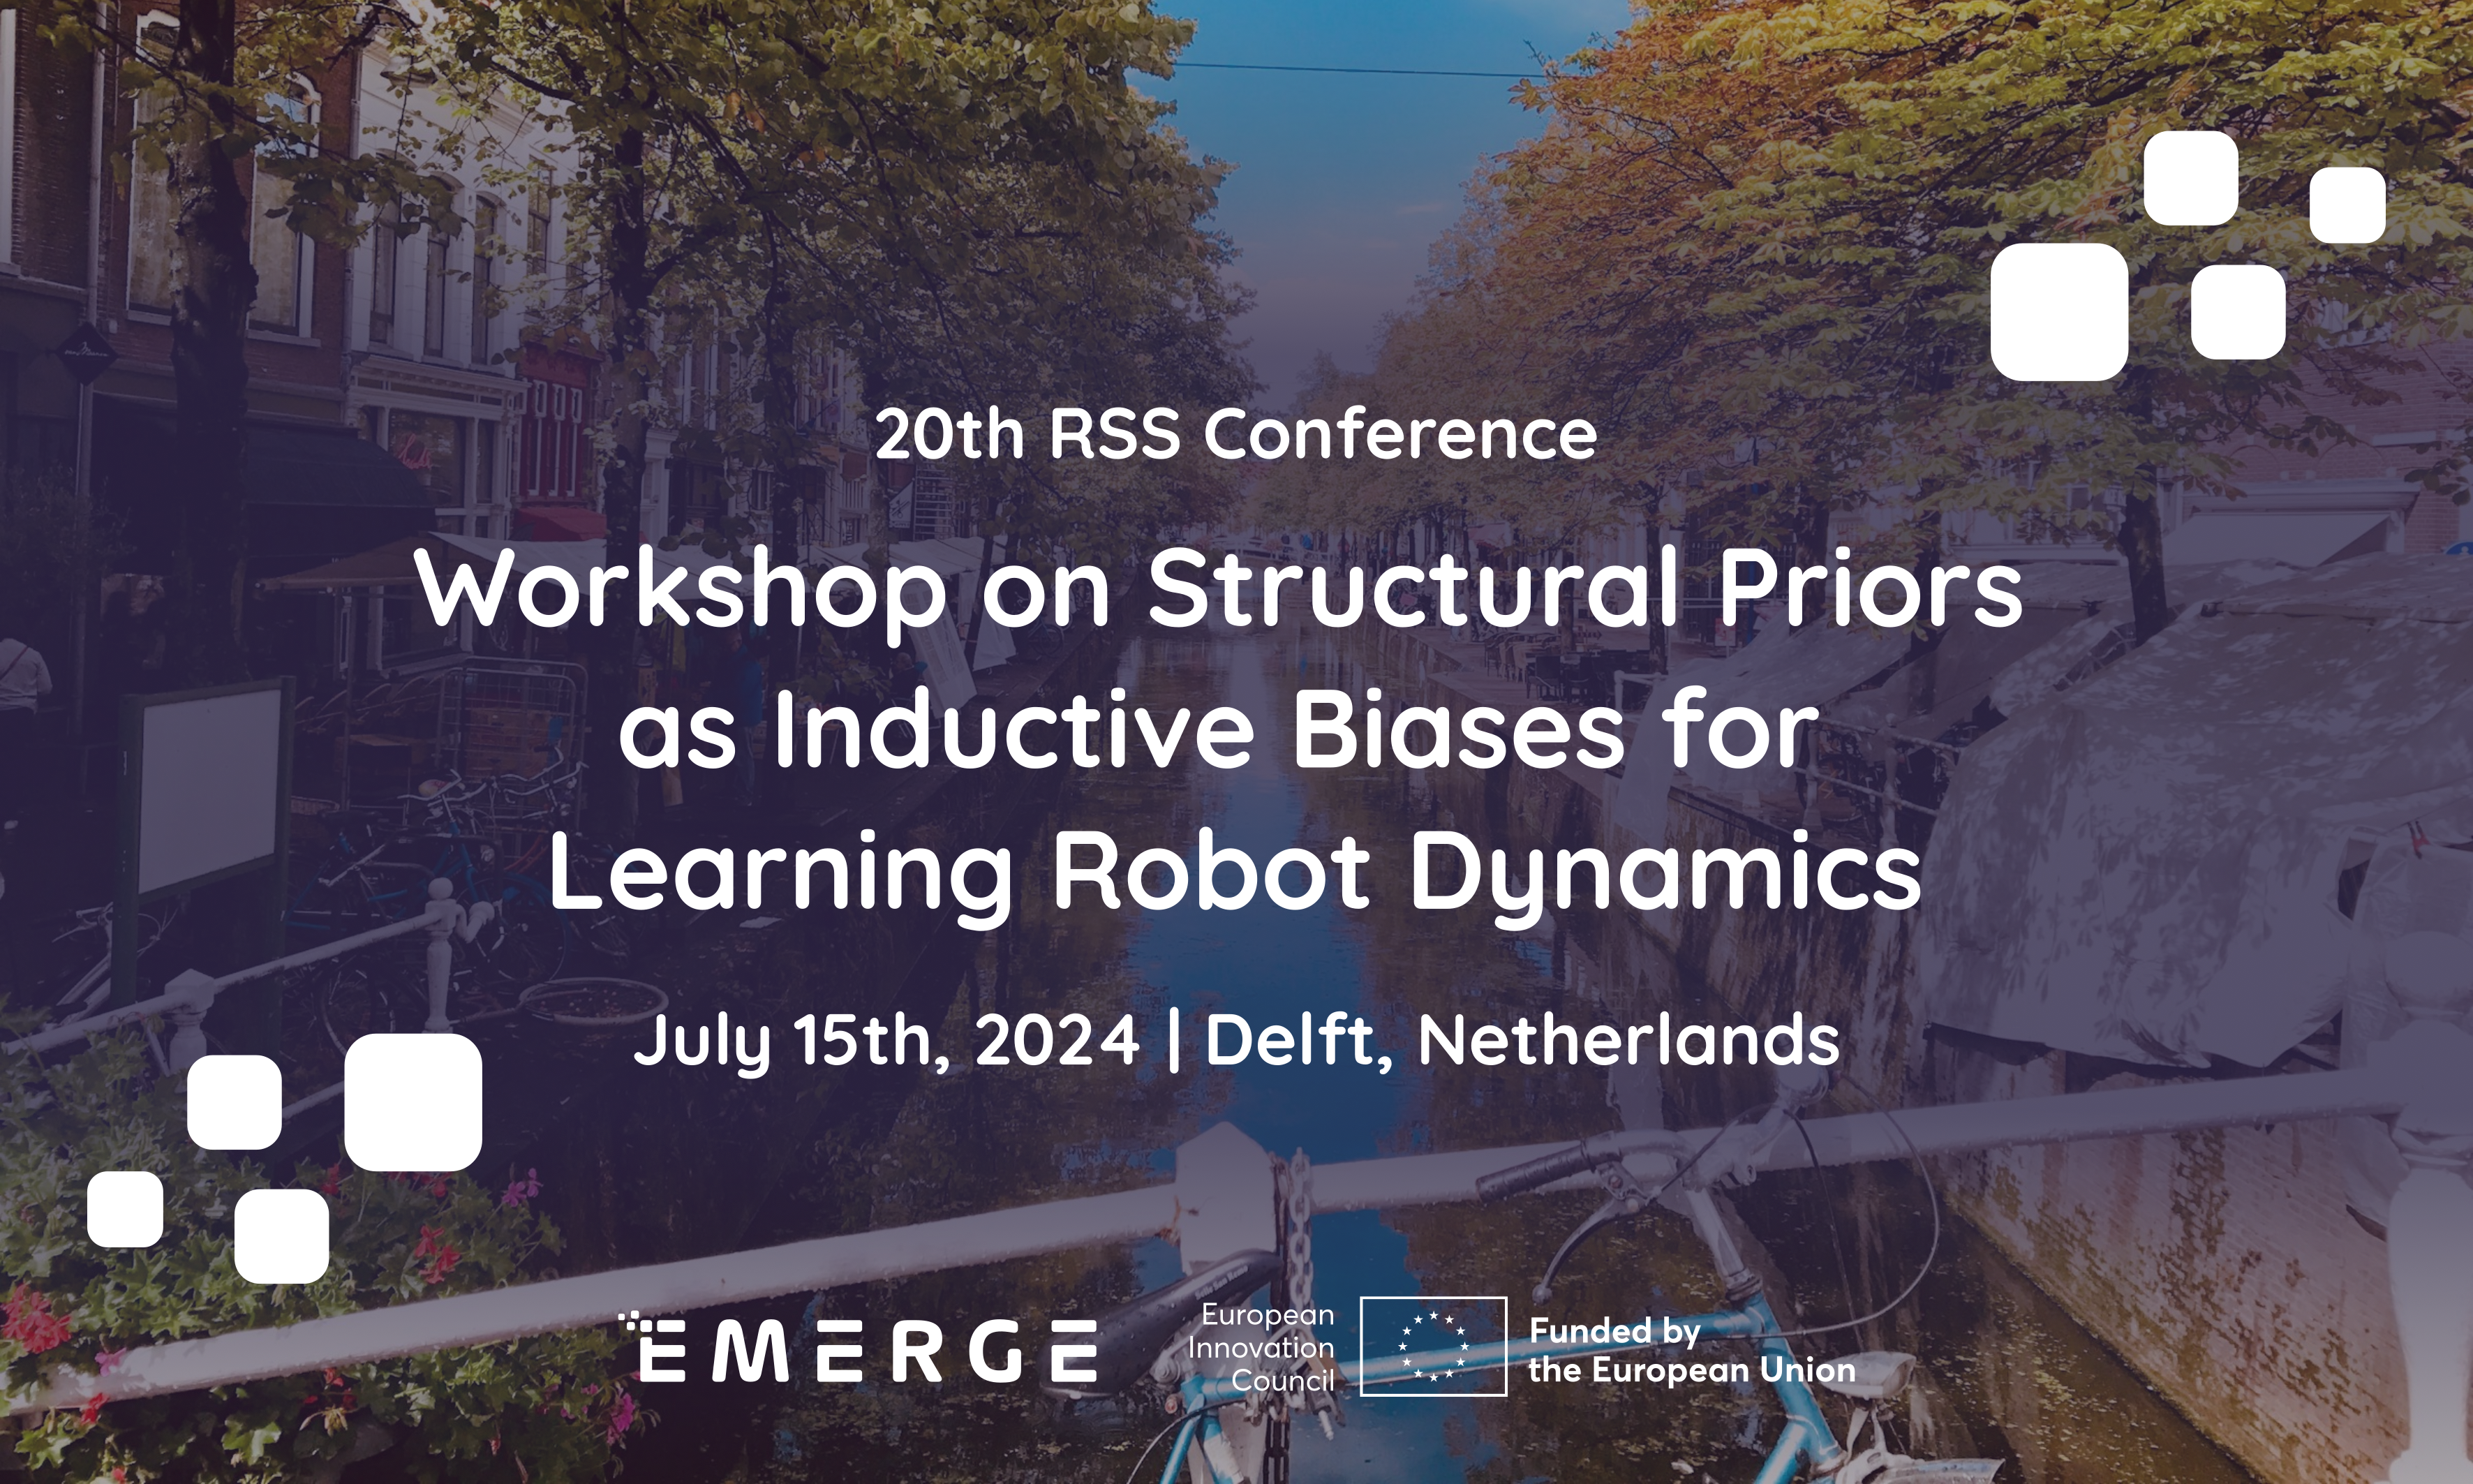 Workshop on Structural Priors as Inductive Biases for Learning Robot Dynamics